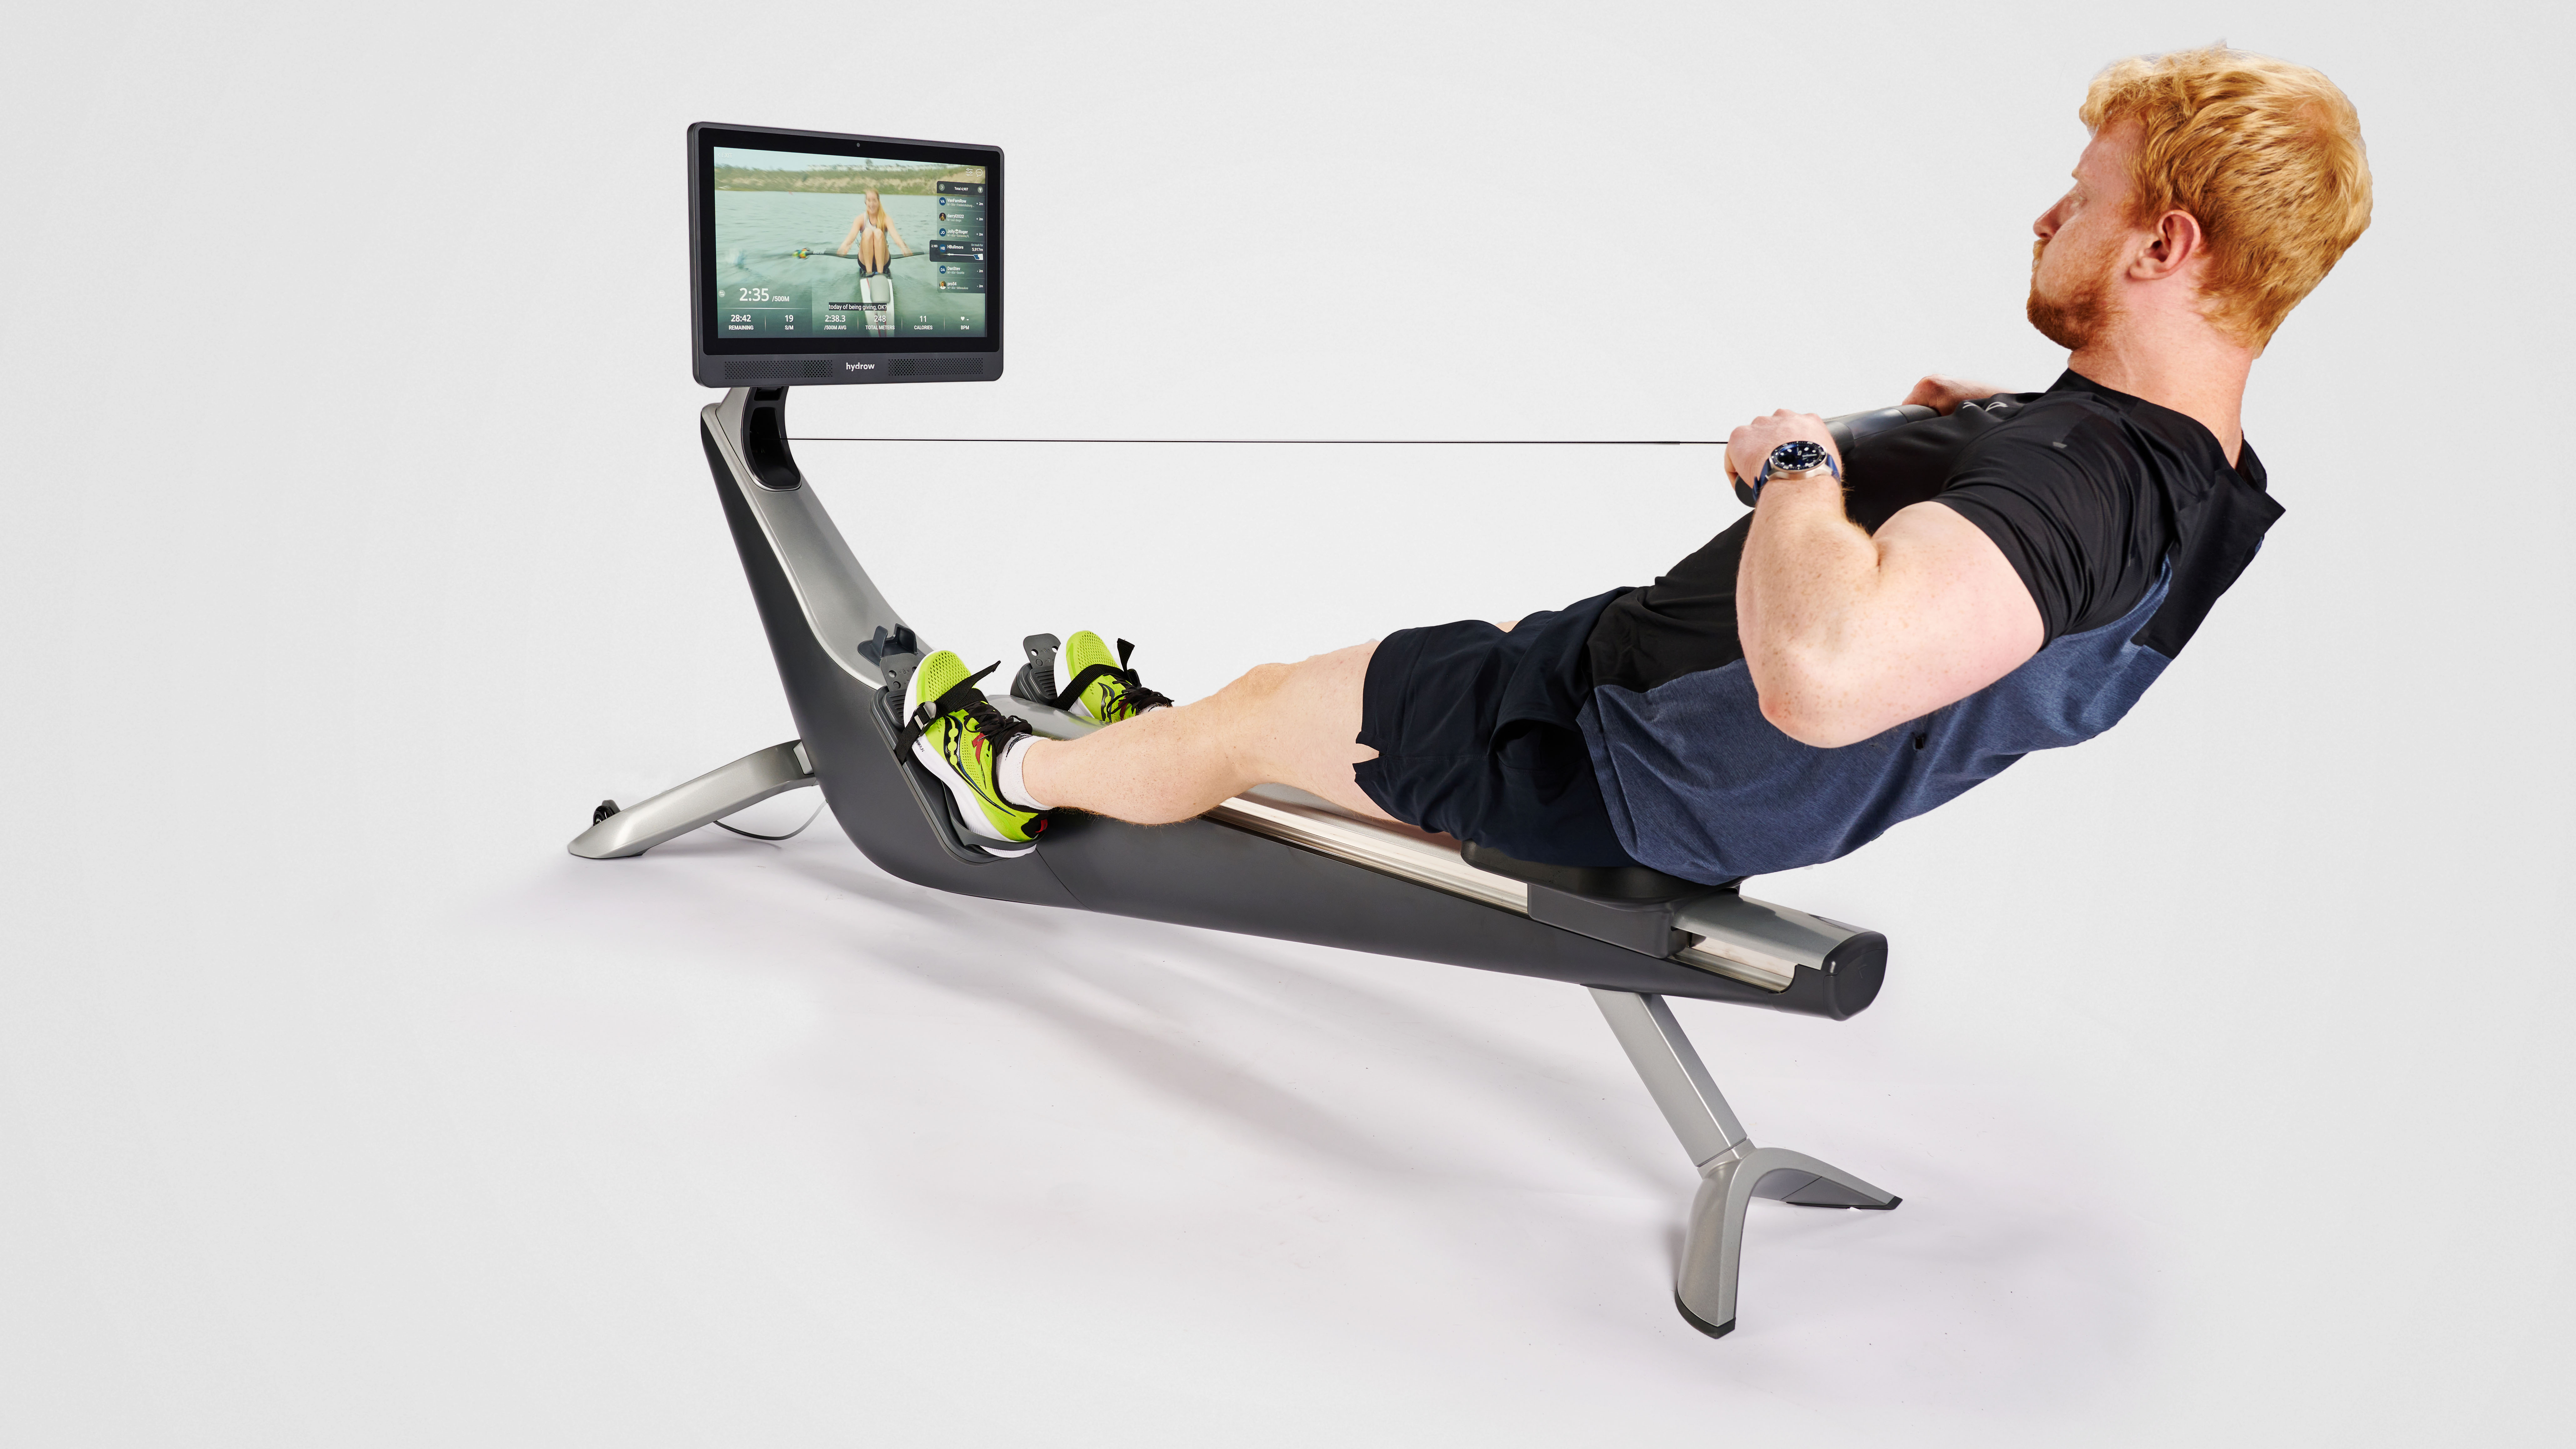 Live Science fitness writer, Harry Bullmore, tests the Hydrow rowing machine